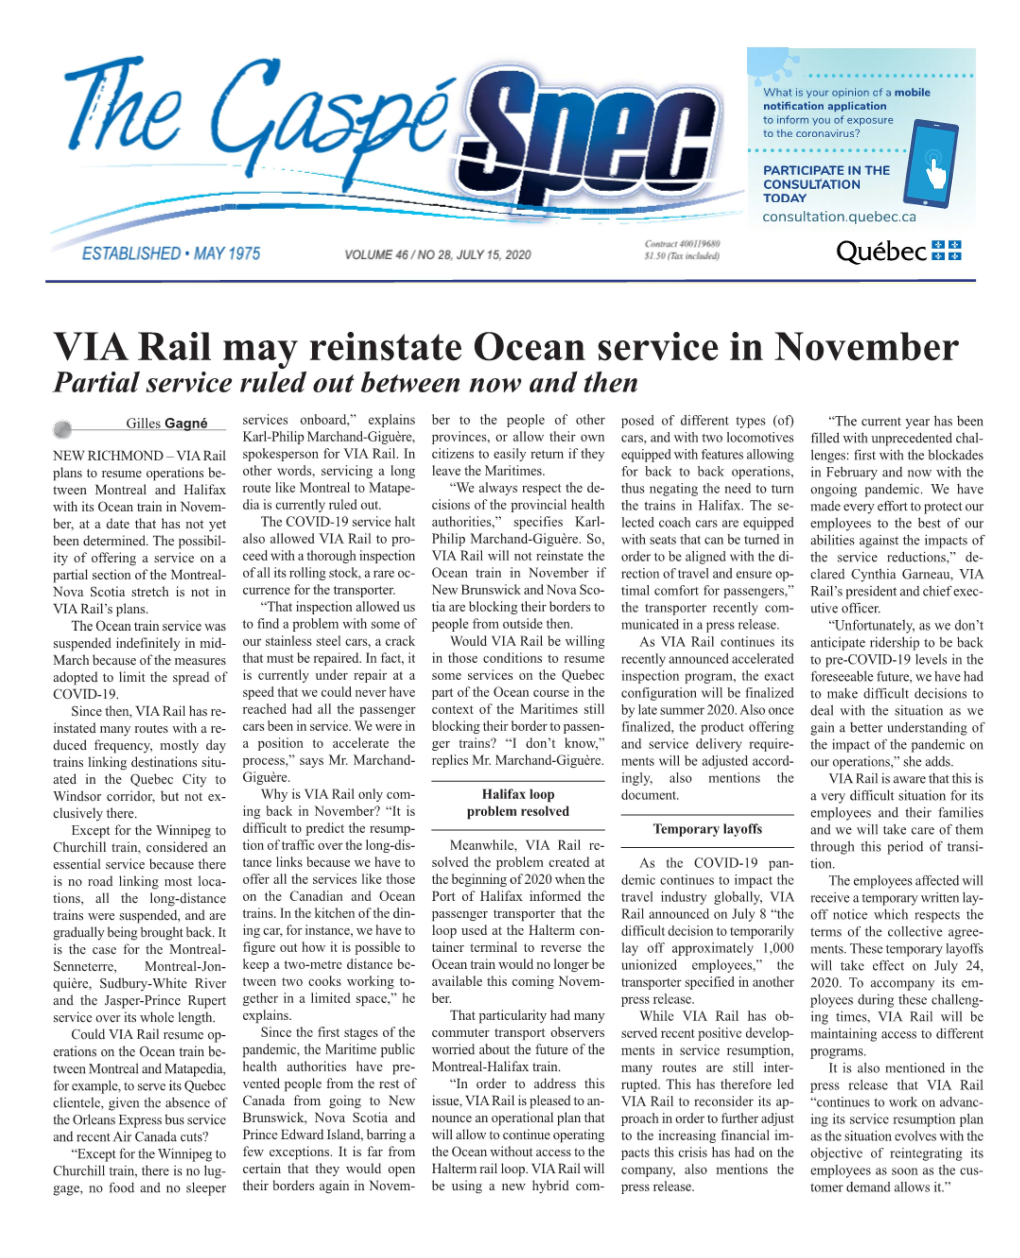 VIA Rail May Reinstate Ocean Service in November Partial Service Ruled out Between Now and Then